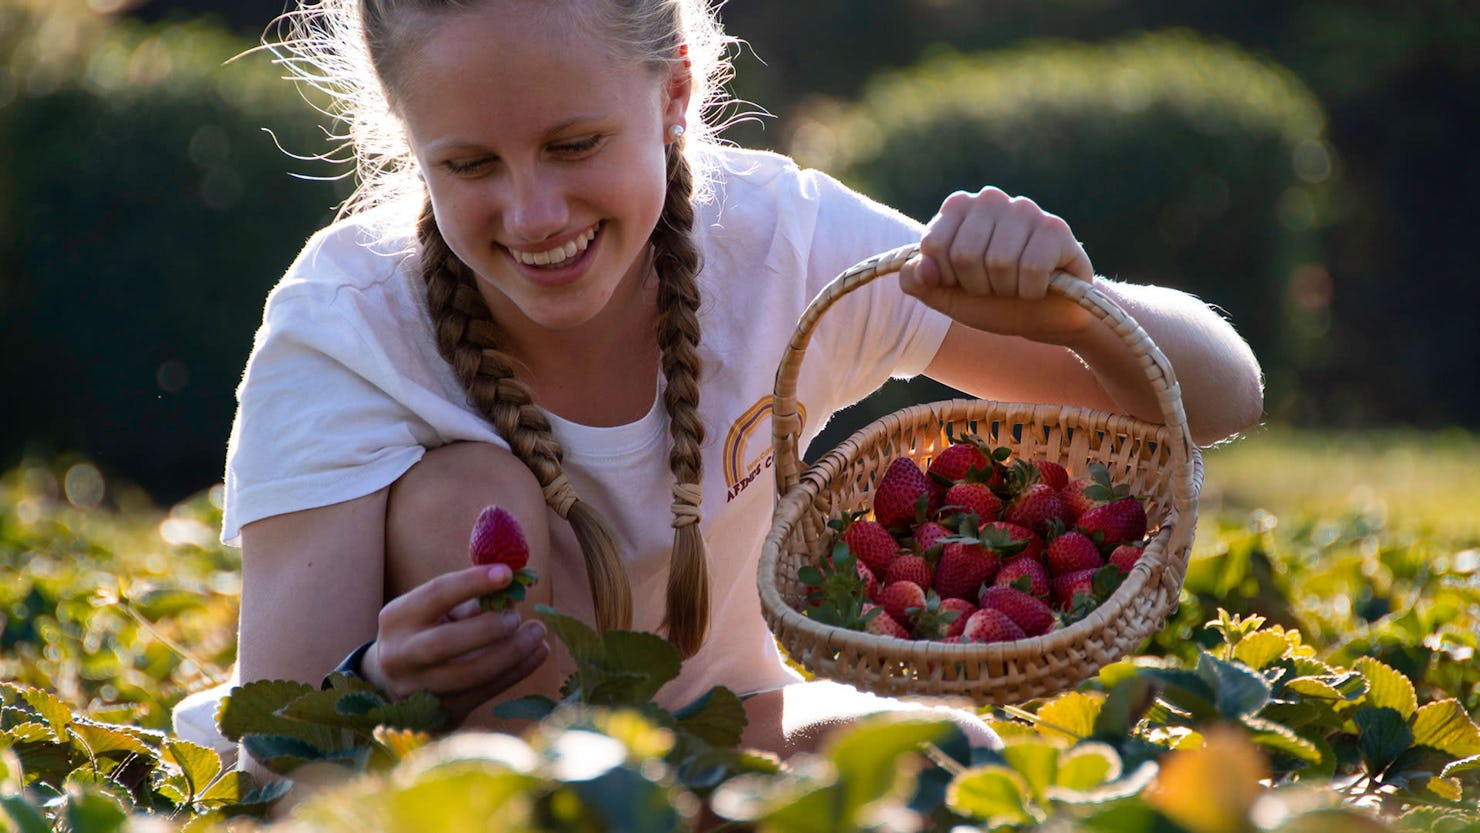 Picking strawberries. Credit: Tourism and Events Queensland
